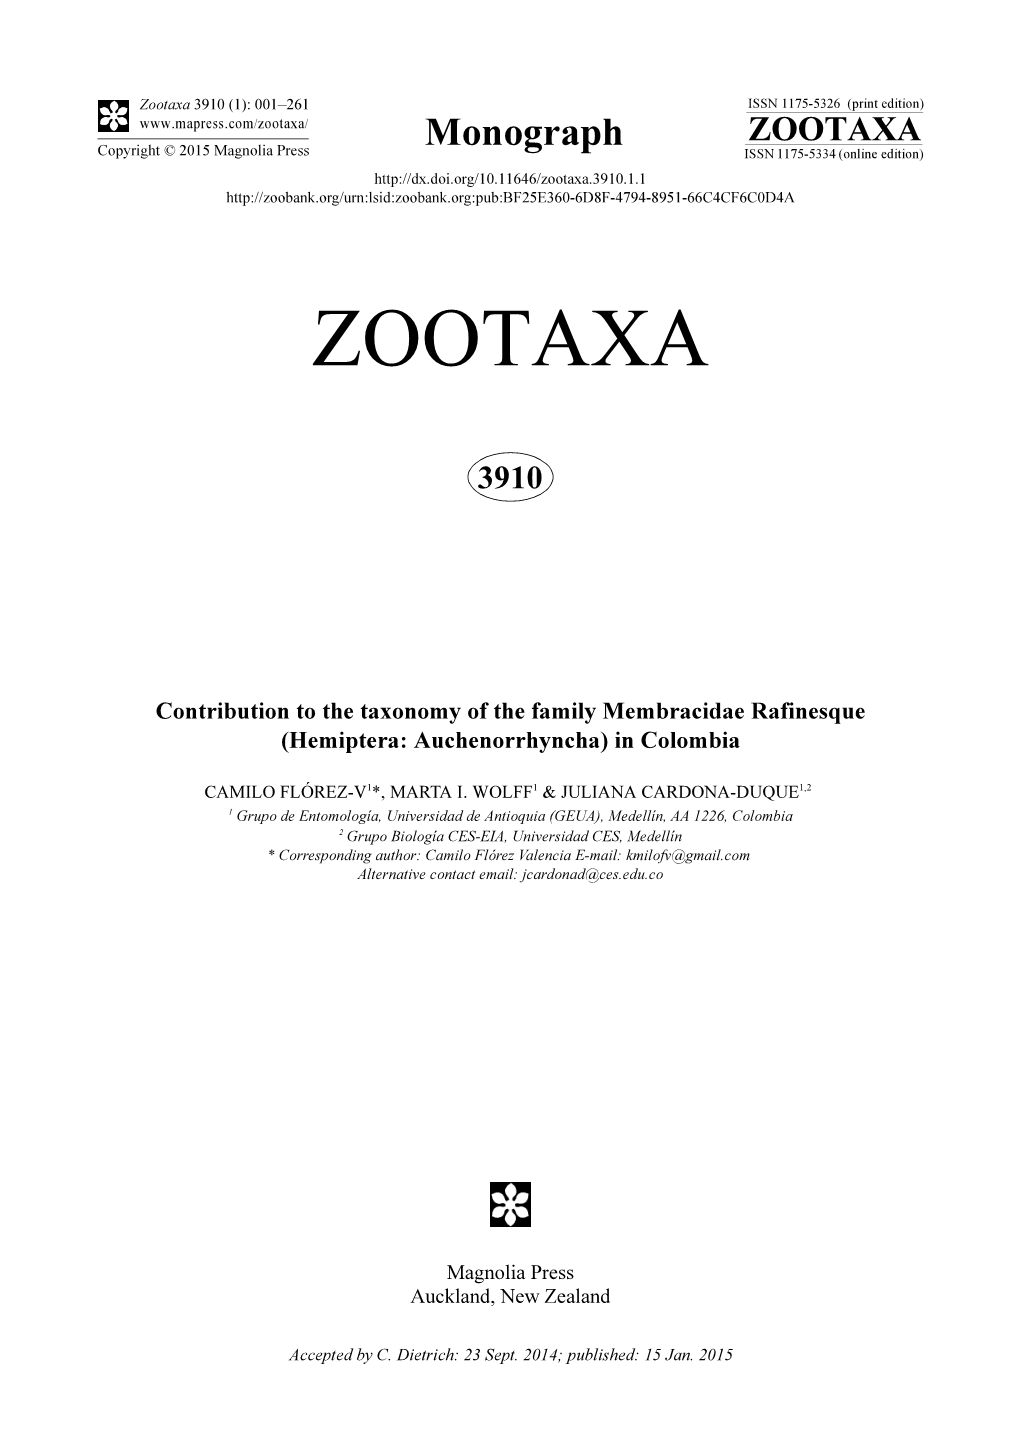 Contribution to the Taxonomy of the Family Membracidae Rafinesque (Hemiptera: Auchenorrhyncha) in Colombia